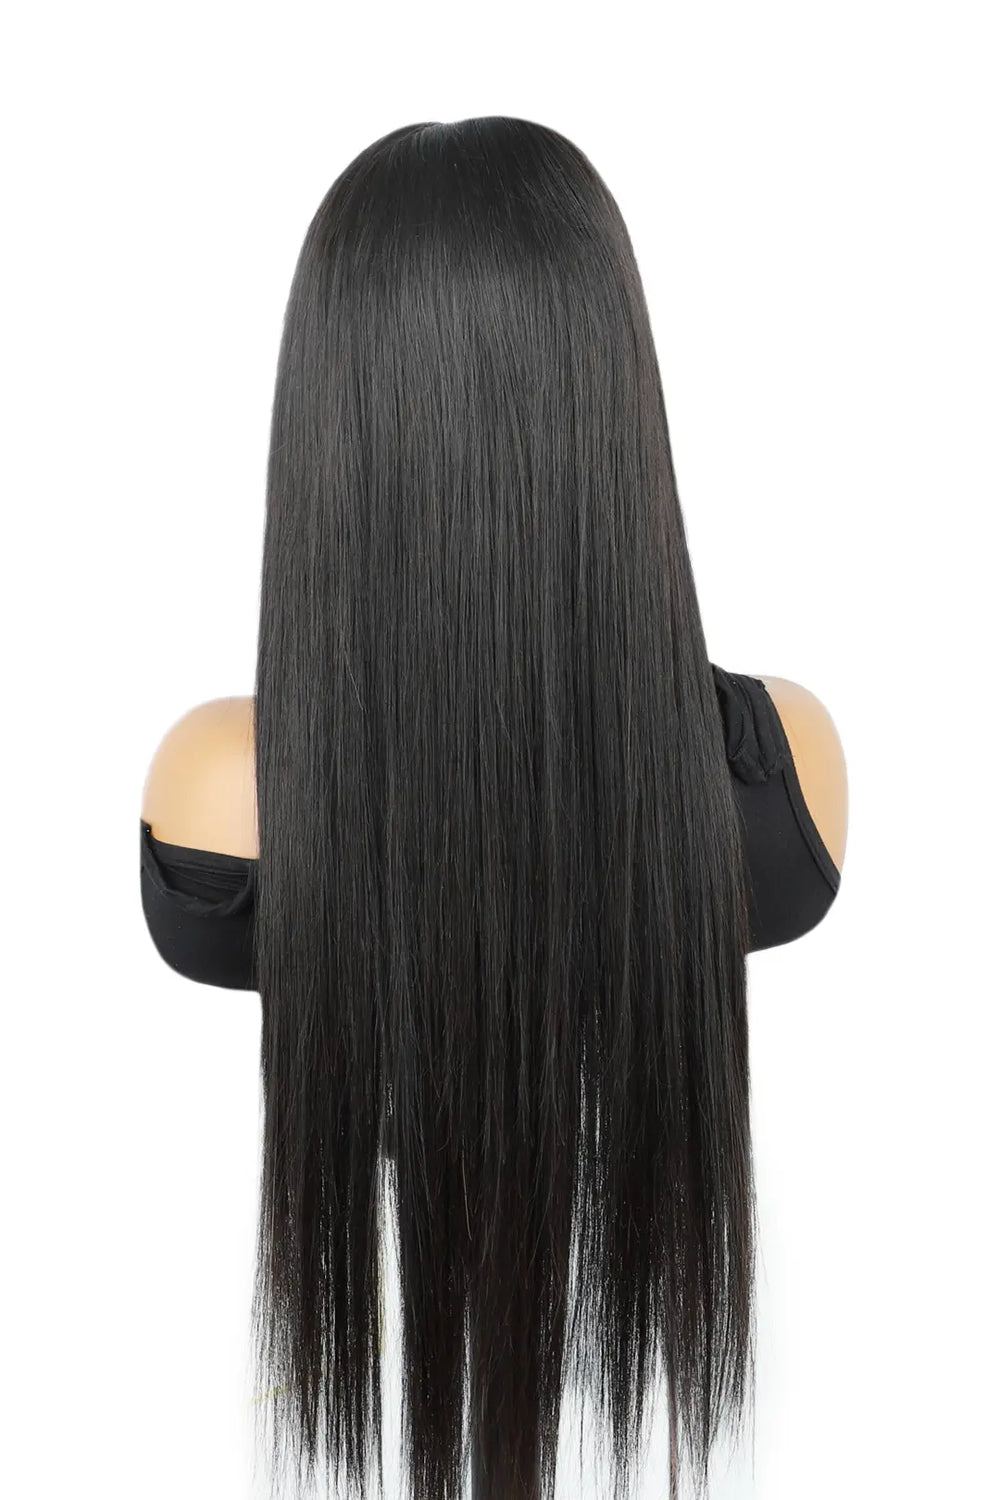 9x6 lace closure wig straight hair black view